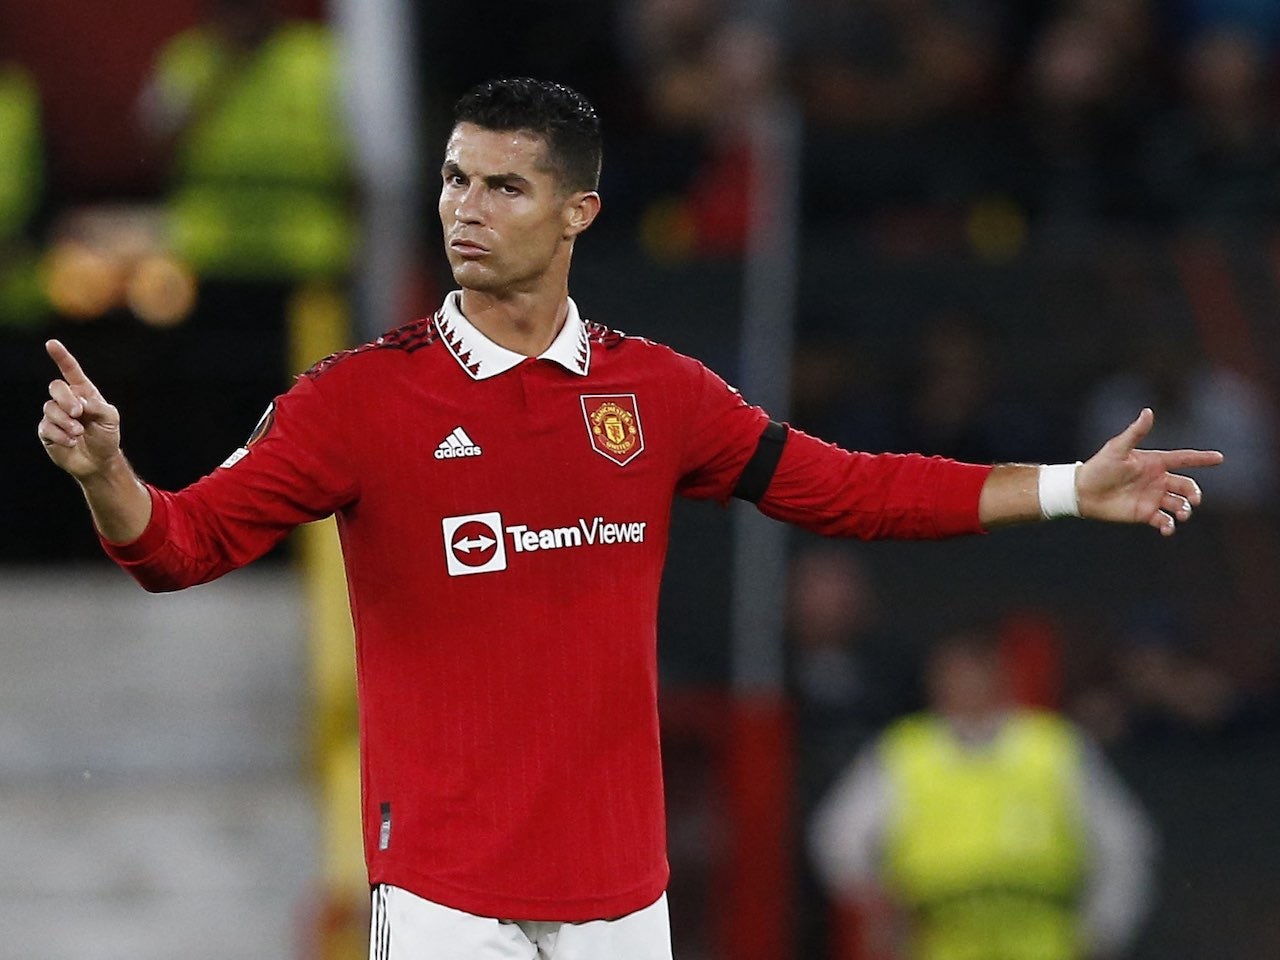 Cristiano Ronaldo: 'I do not know whether I will leave Manchester United'